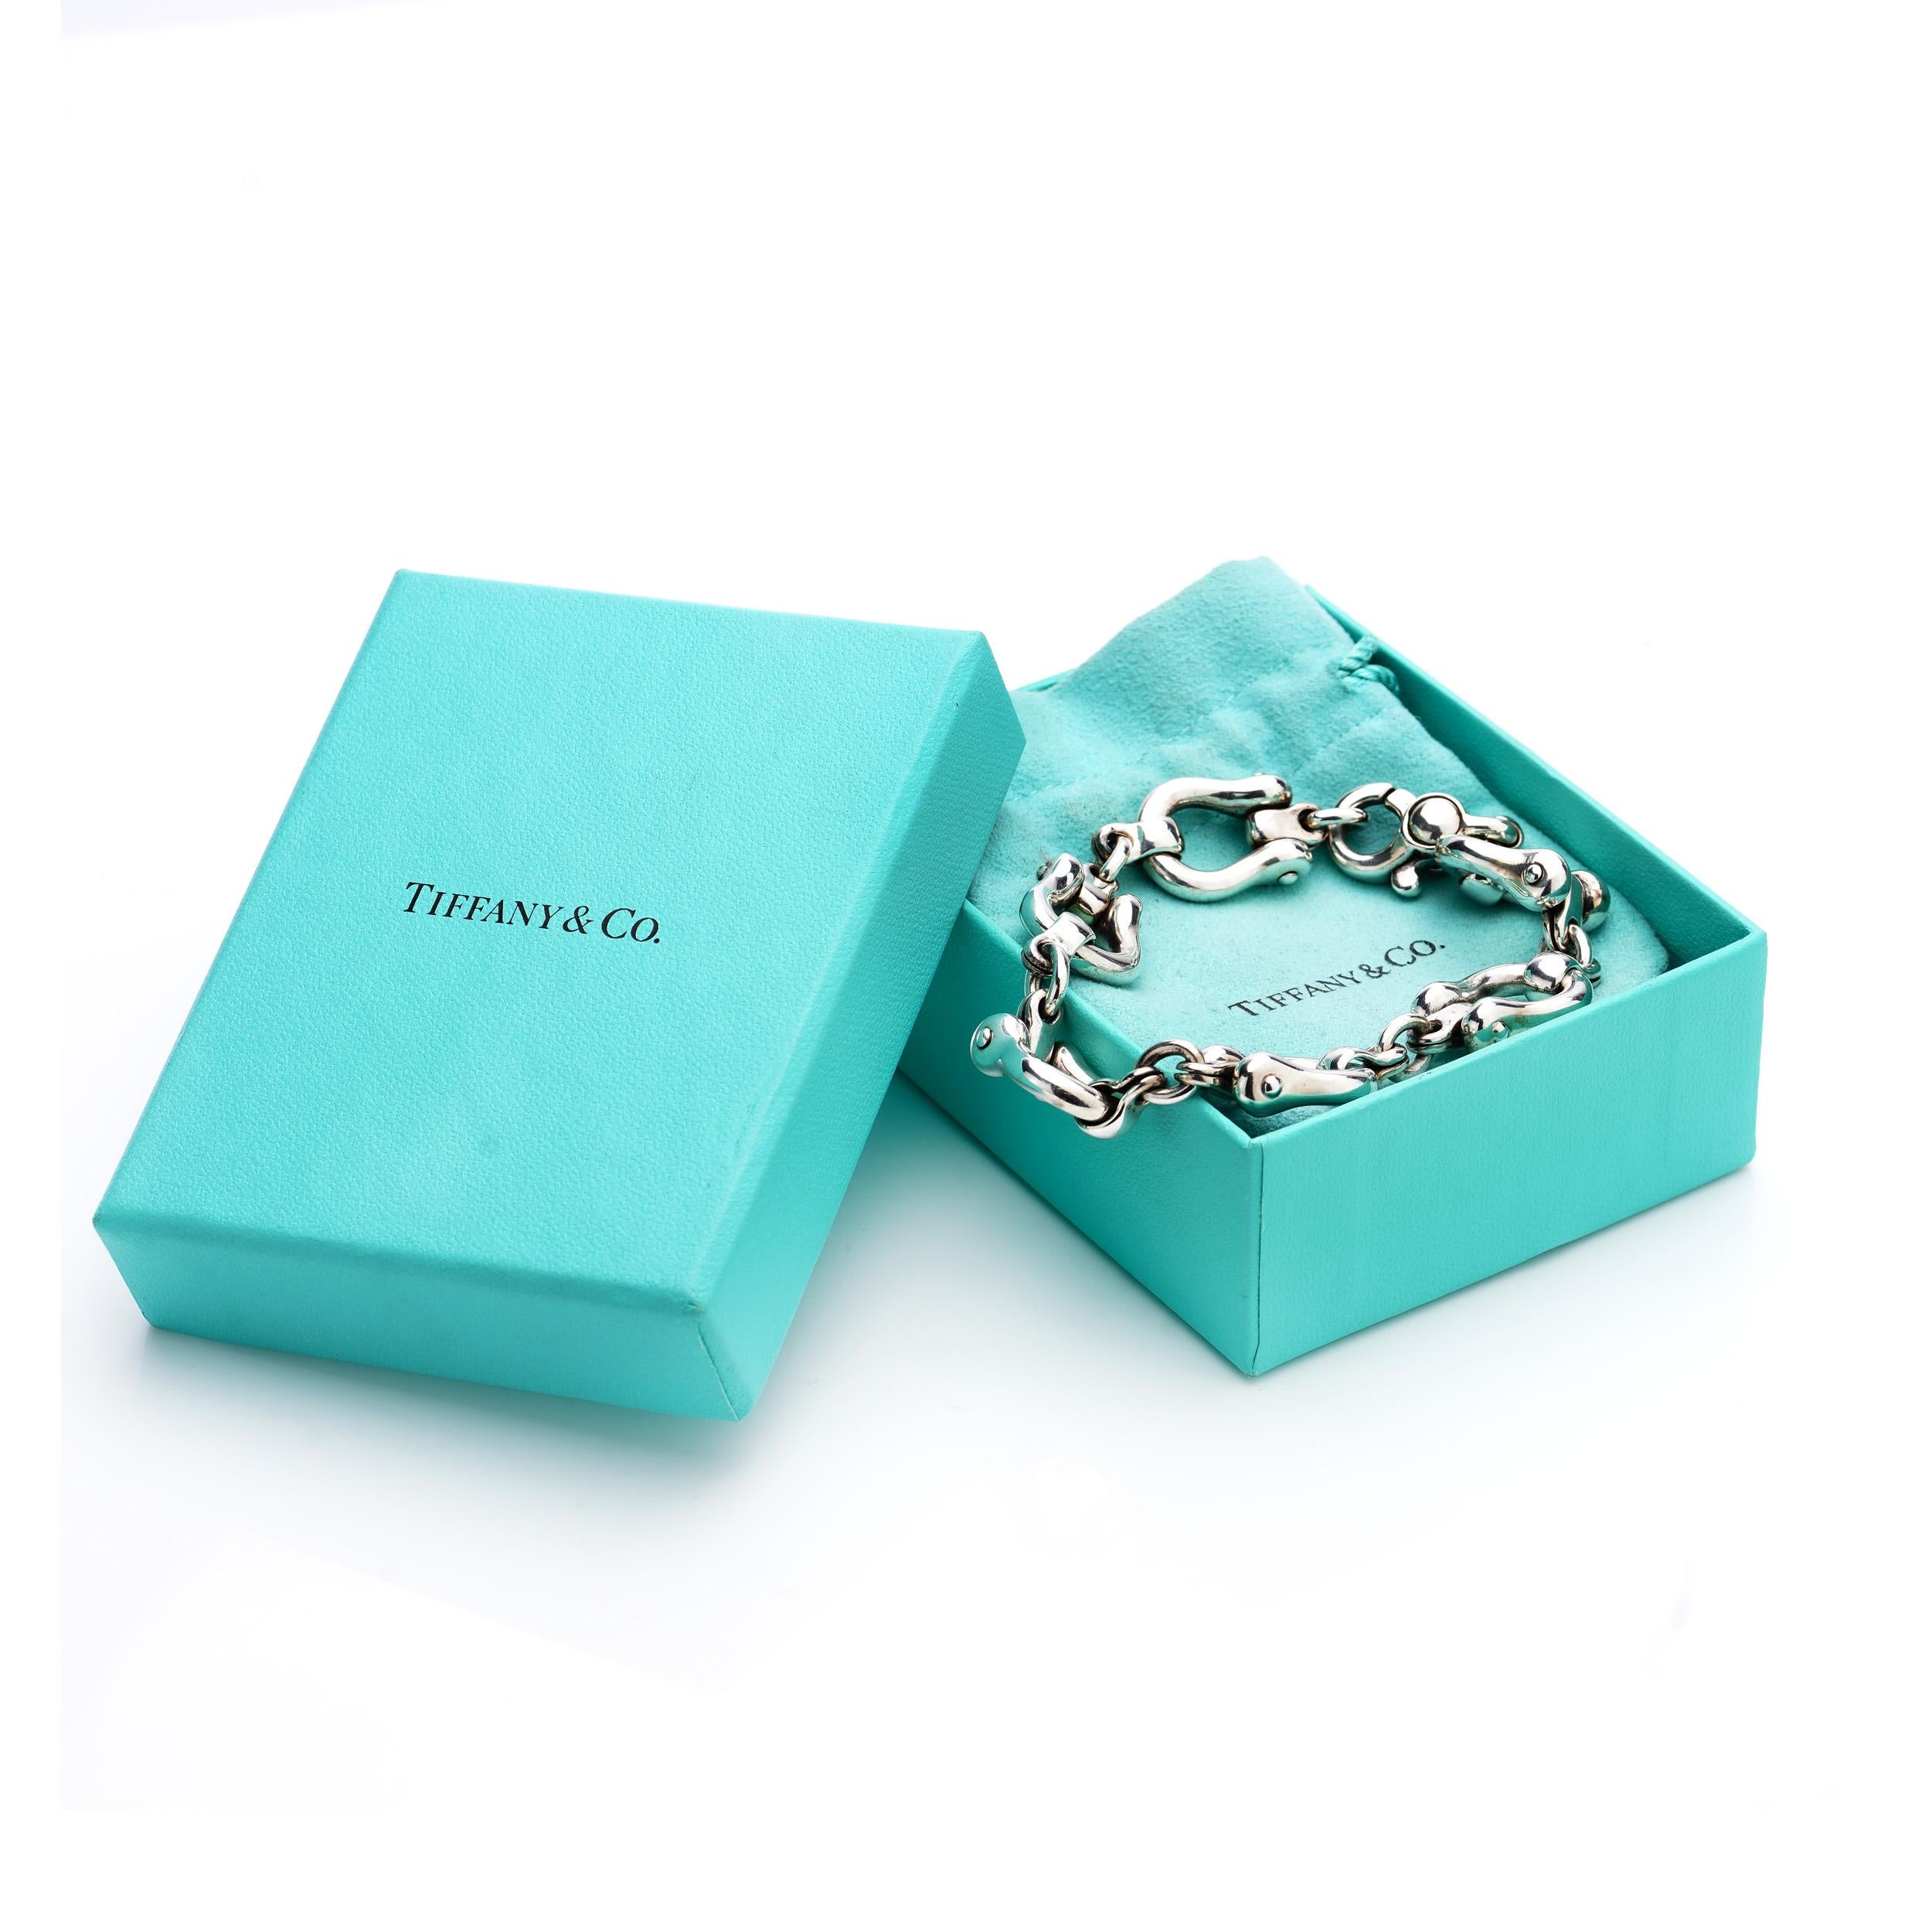 Tiffany & Co. 925 sterling silver rare horseshoe link bracelet. 
Made in Italy, Between 1995 to 1997, imported to England, in 2000 

This handmade  bracelet is from the 1995 -  1997 collection and has no longer been made, 
It is an example of fine